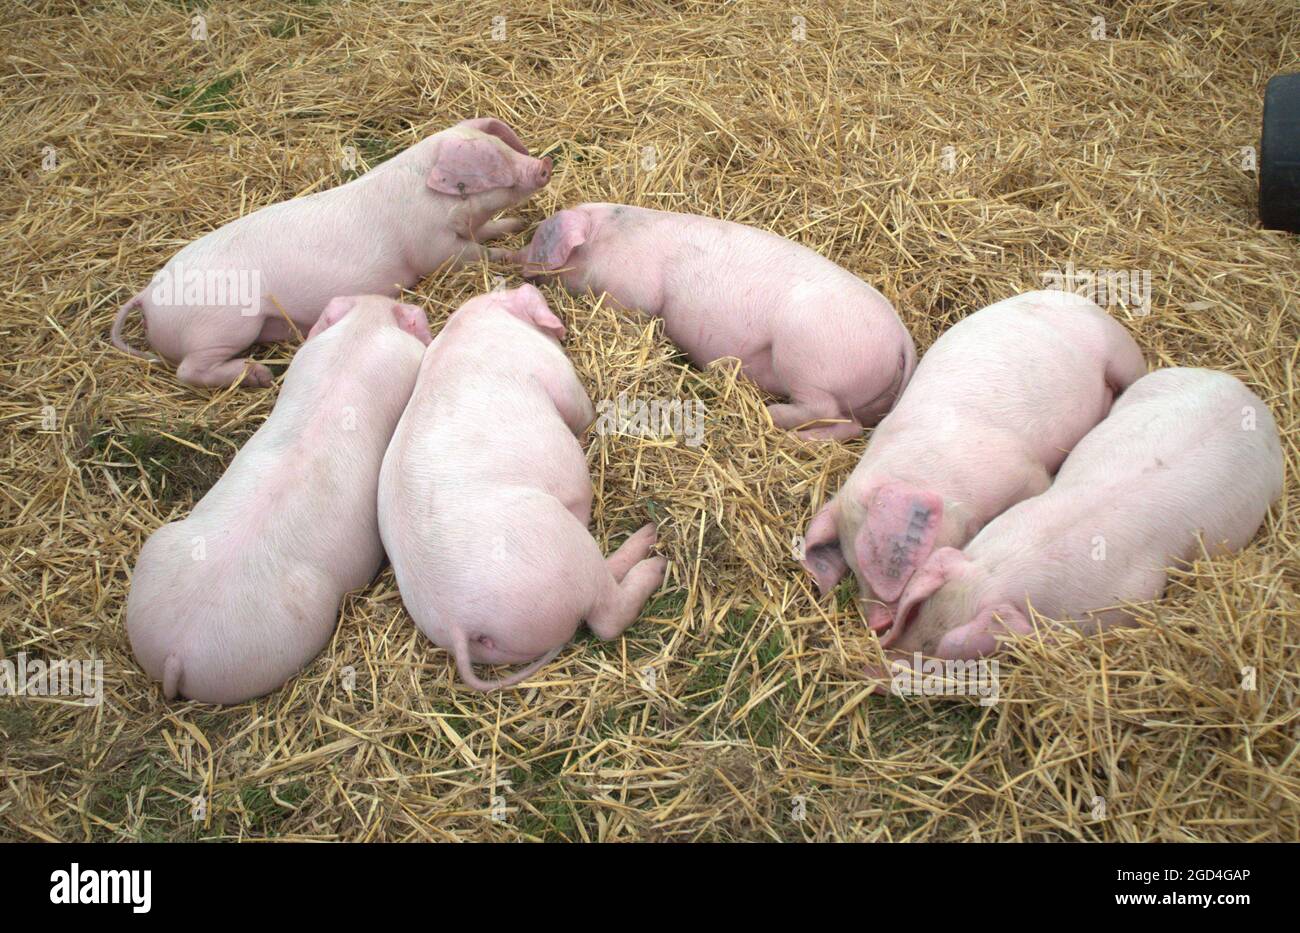 A group of young sleepy pigs in a pen at The Royal Cheshire Show 2021 Stock Photo